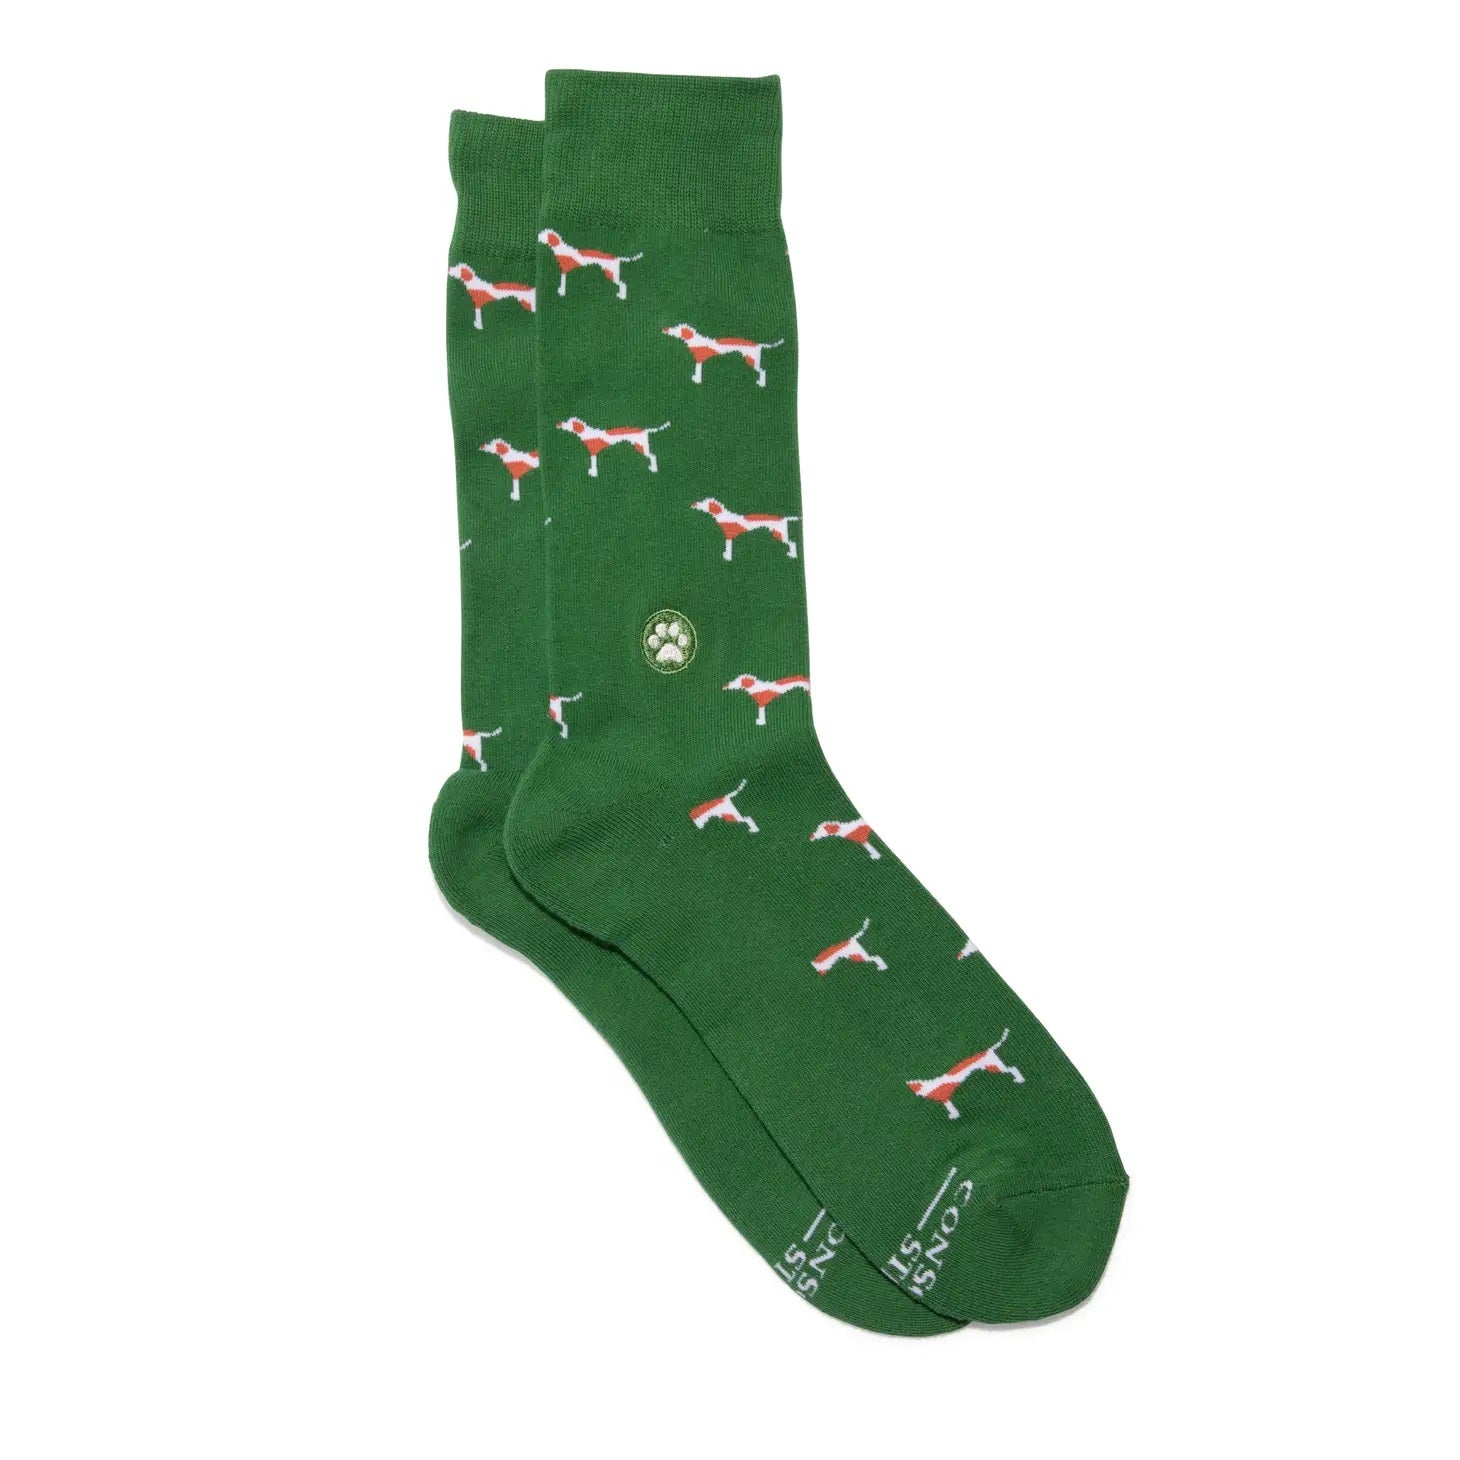 Conscious Step, Socks that Save Dogs - Spotted Doggos - Boutique Dandelion